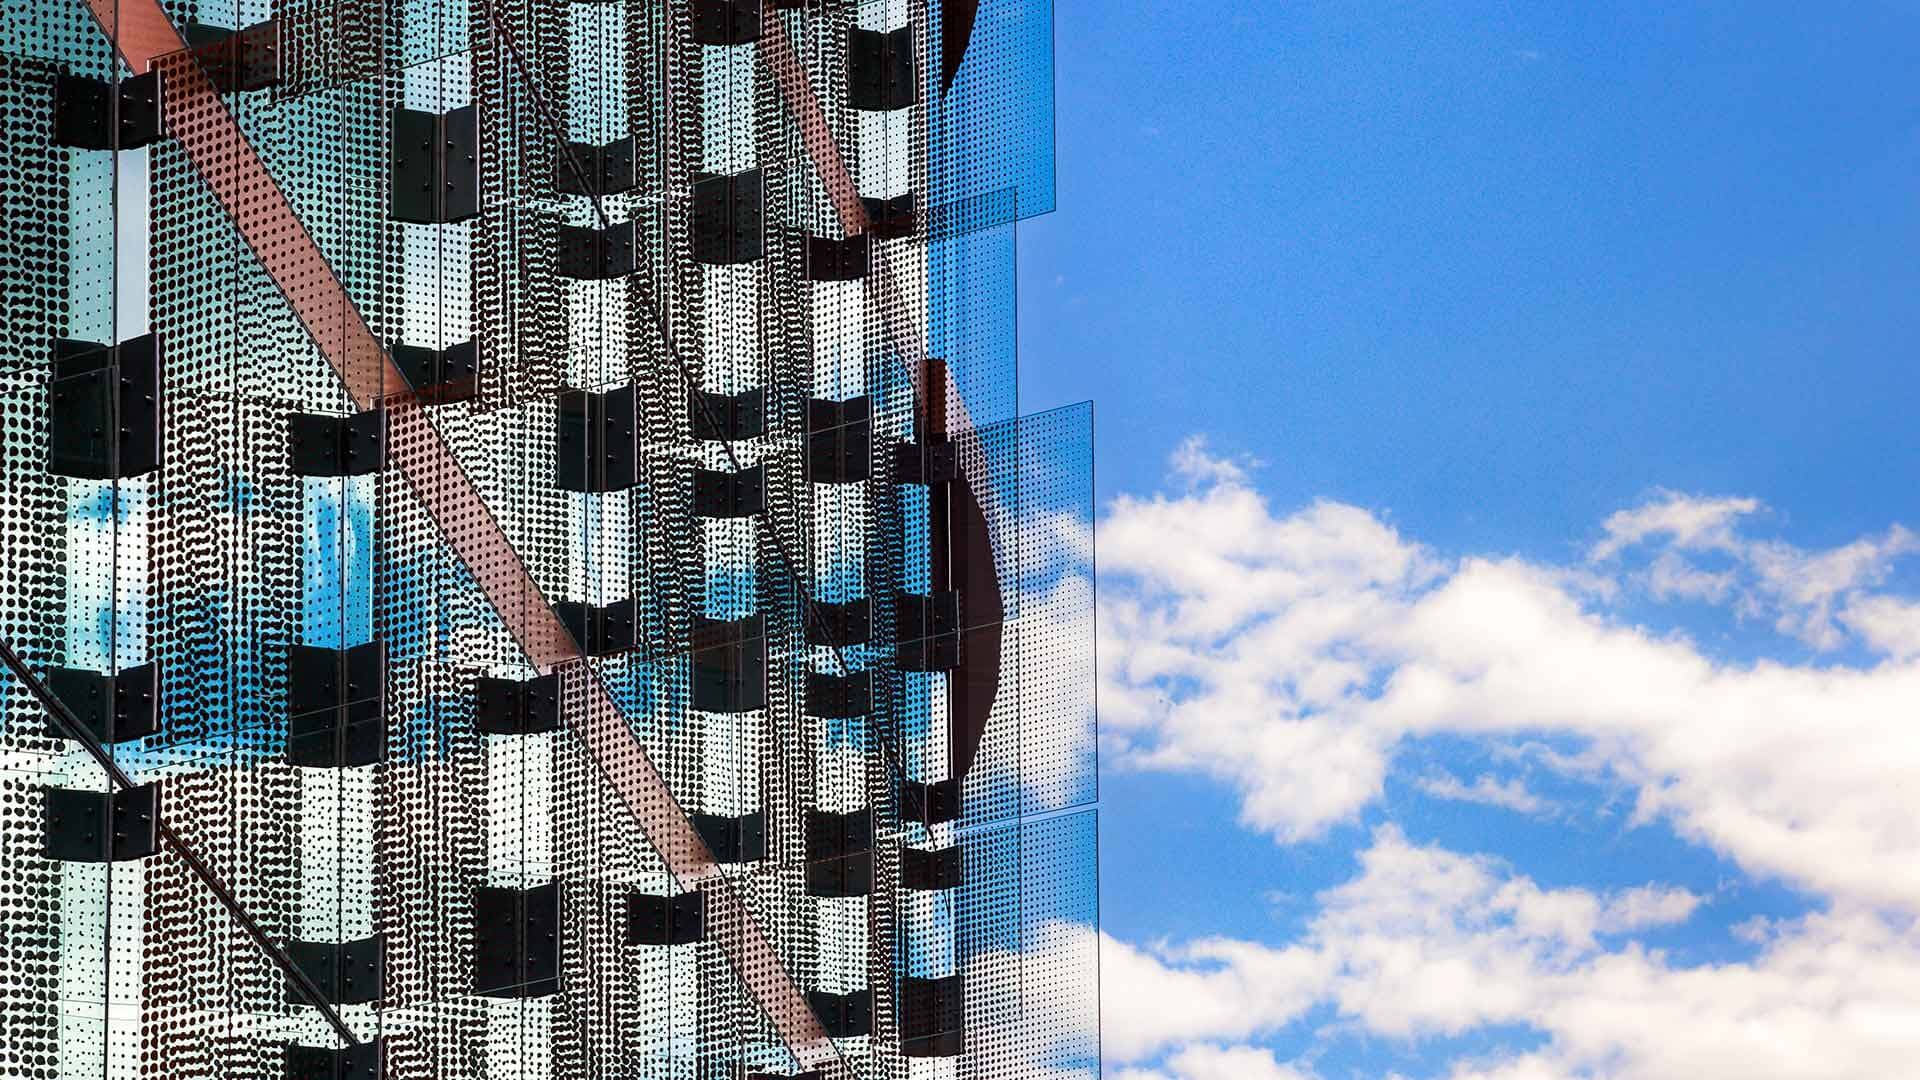 Windows at the Iribe Center against a blue sky